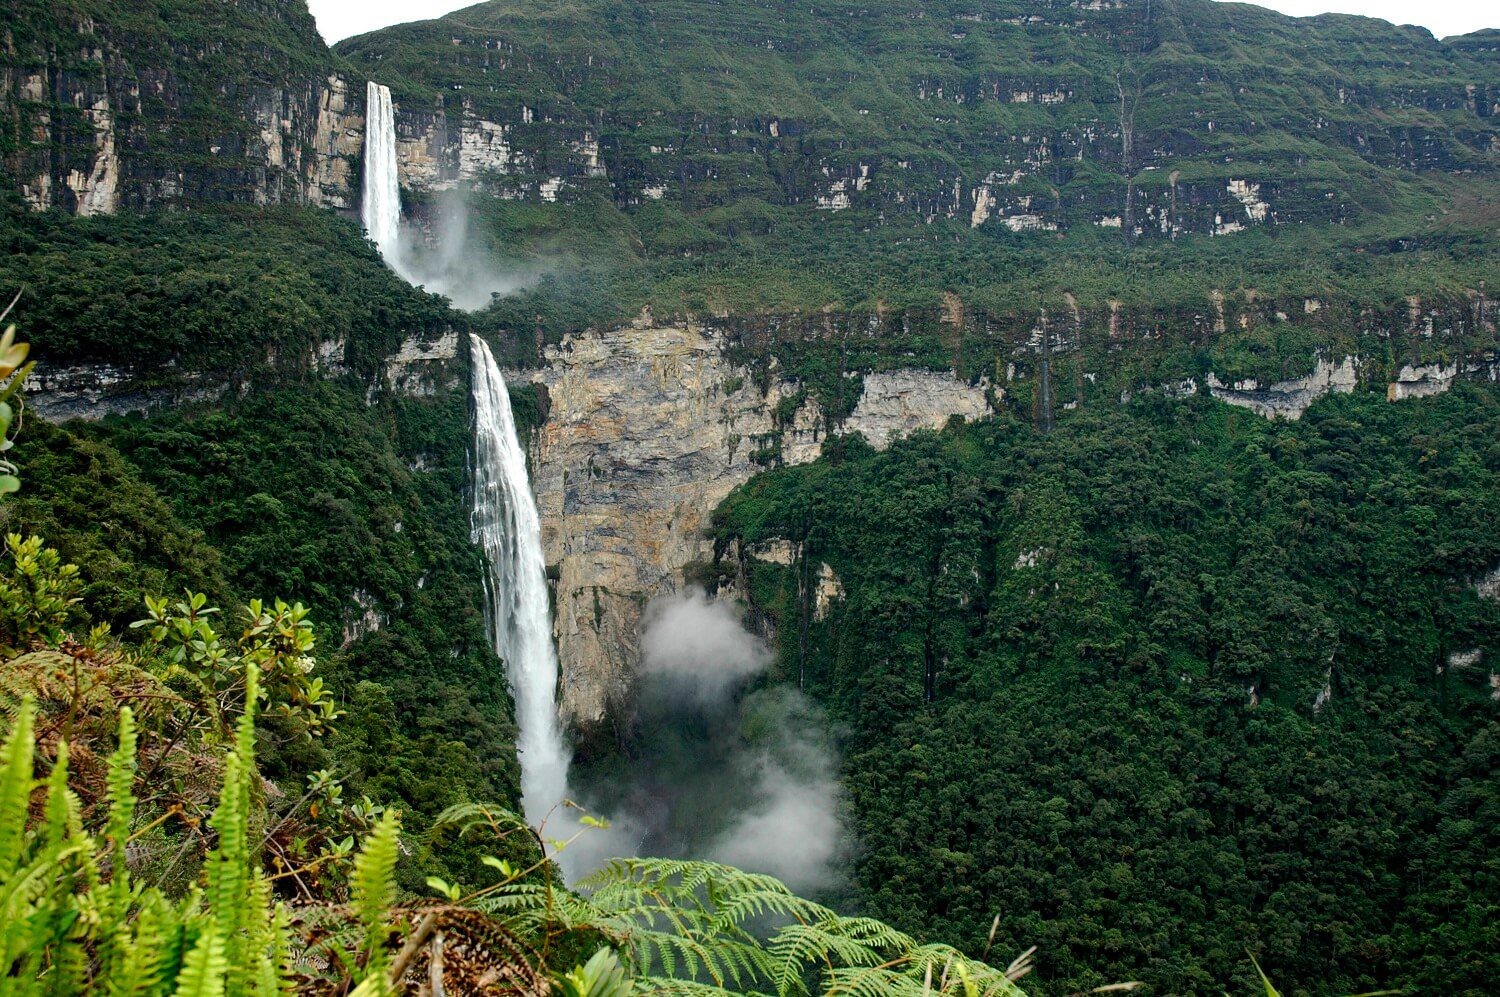 The Gocta Waterfall in the Chachapoyas area of Peru - RESPONSible Travel Peru